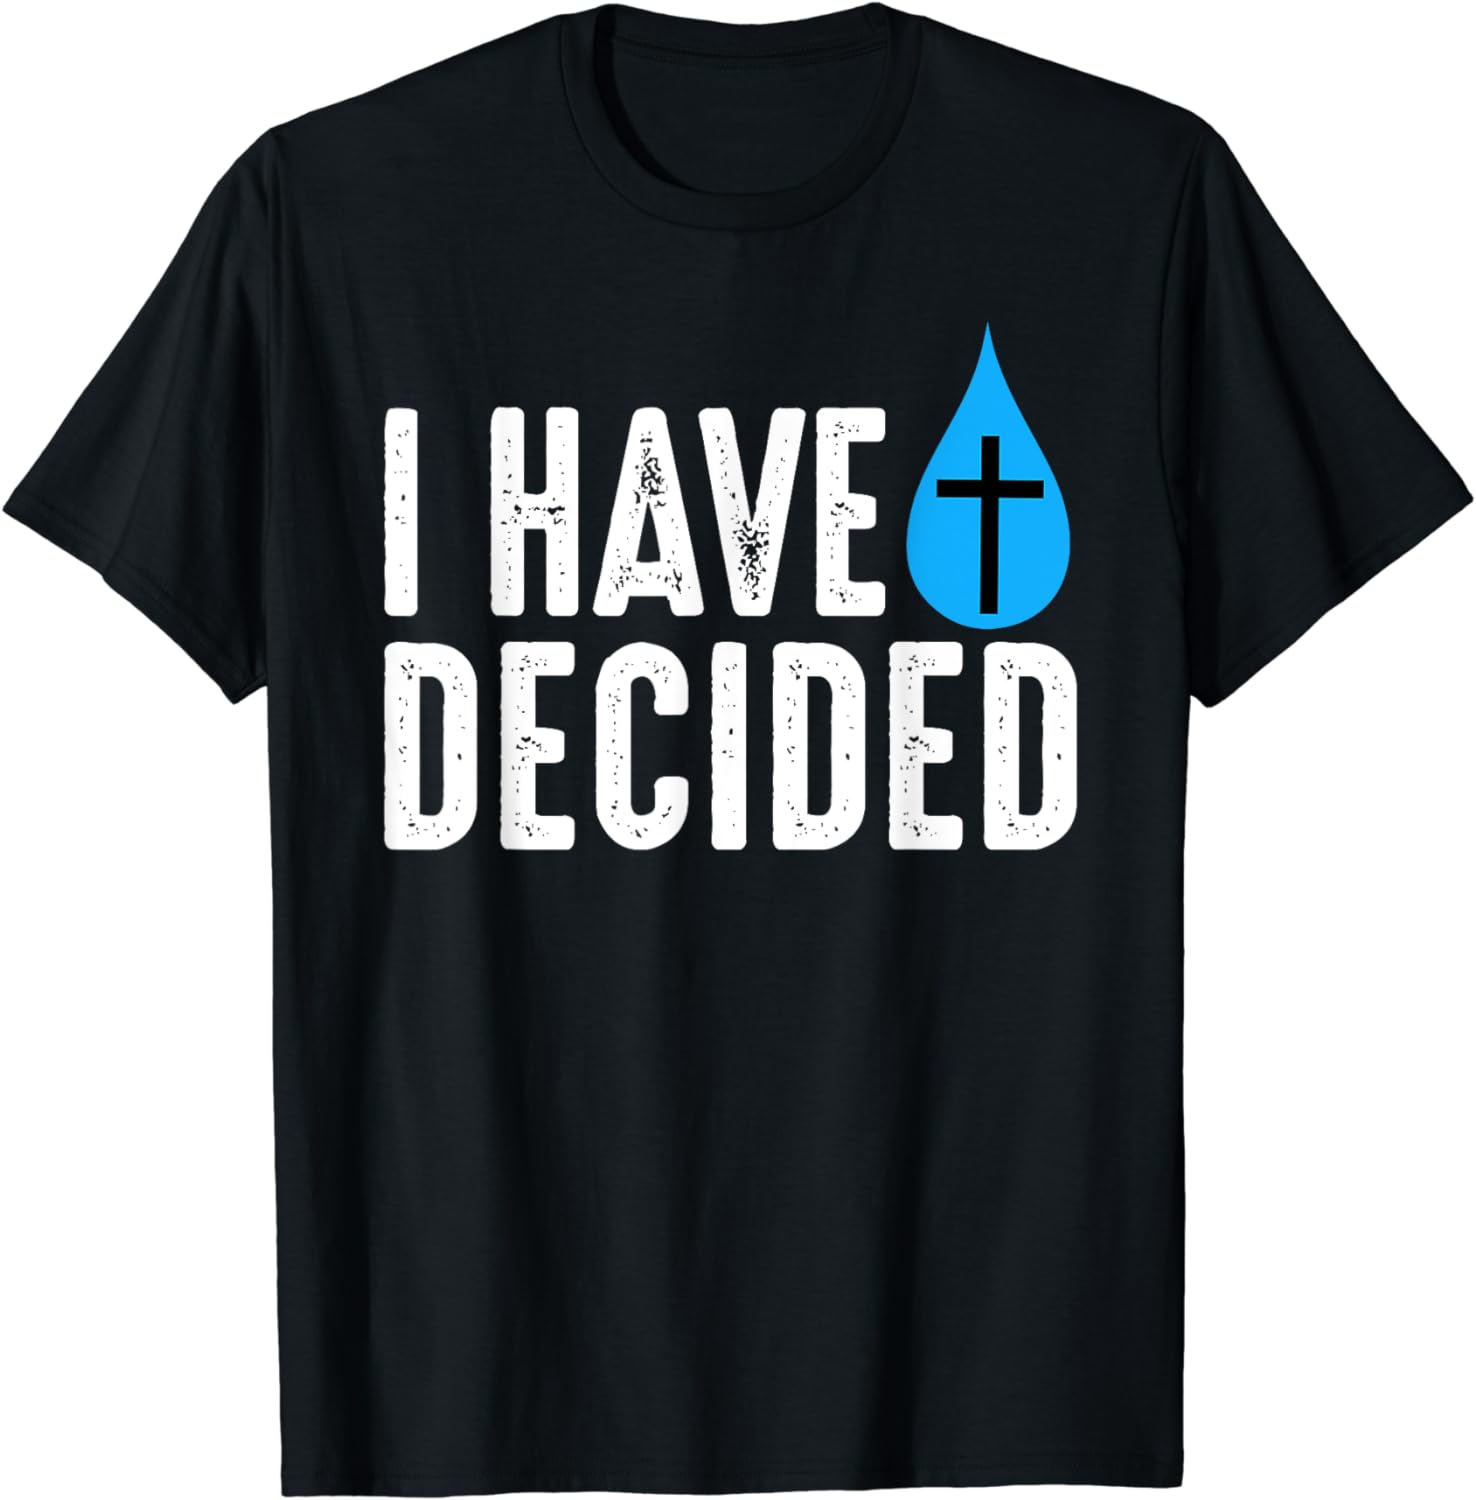 Shirts For Church Groups